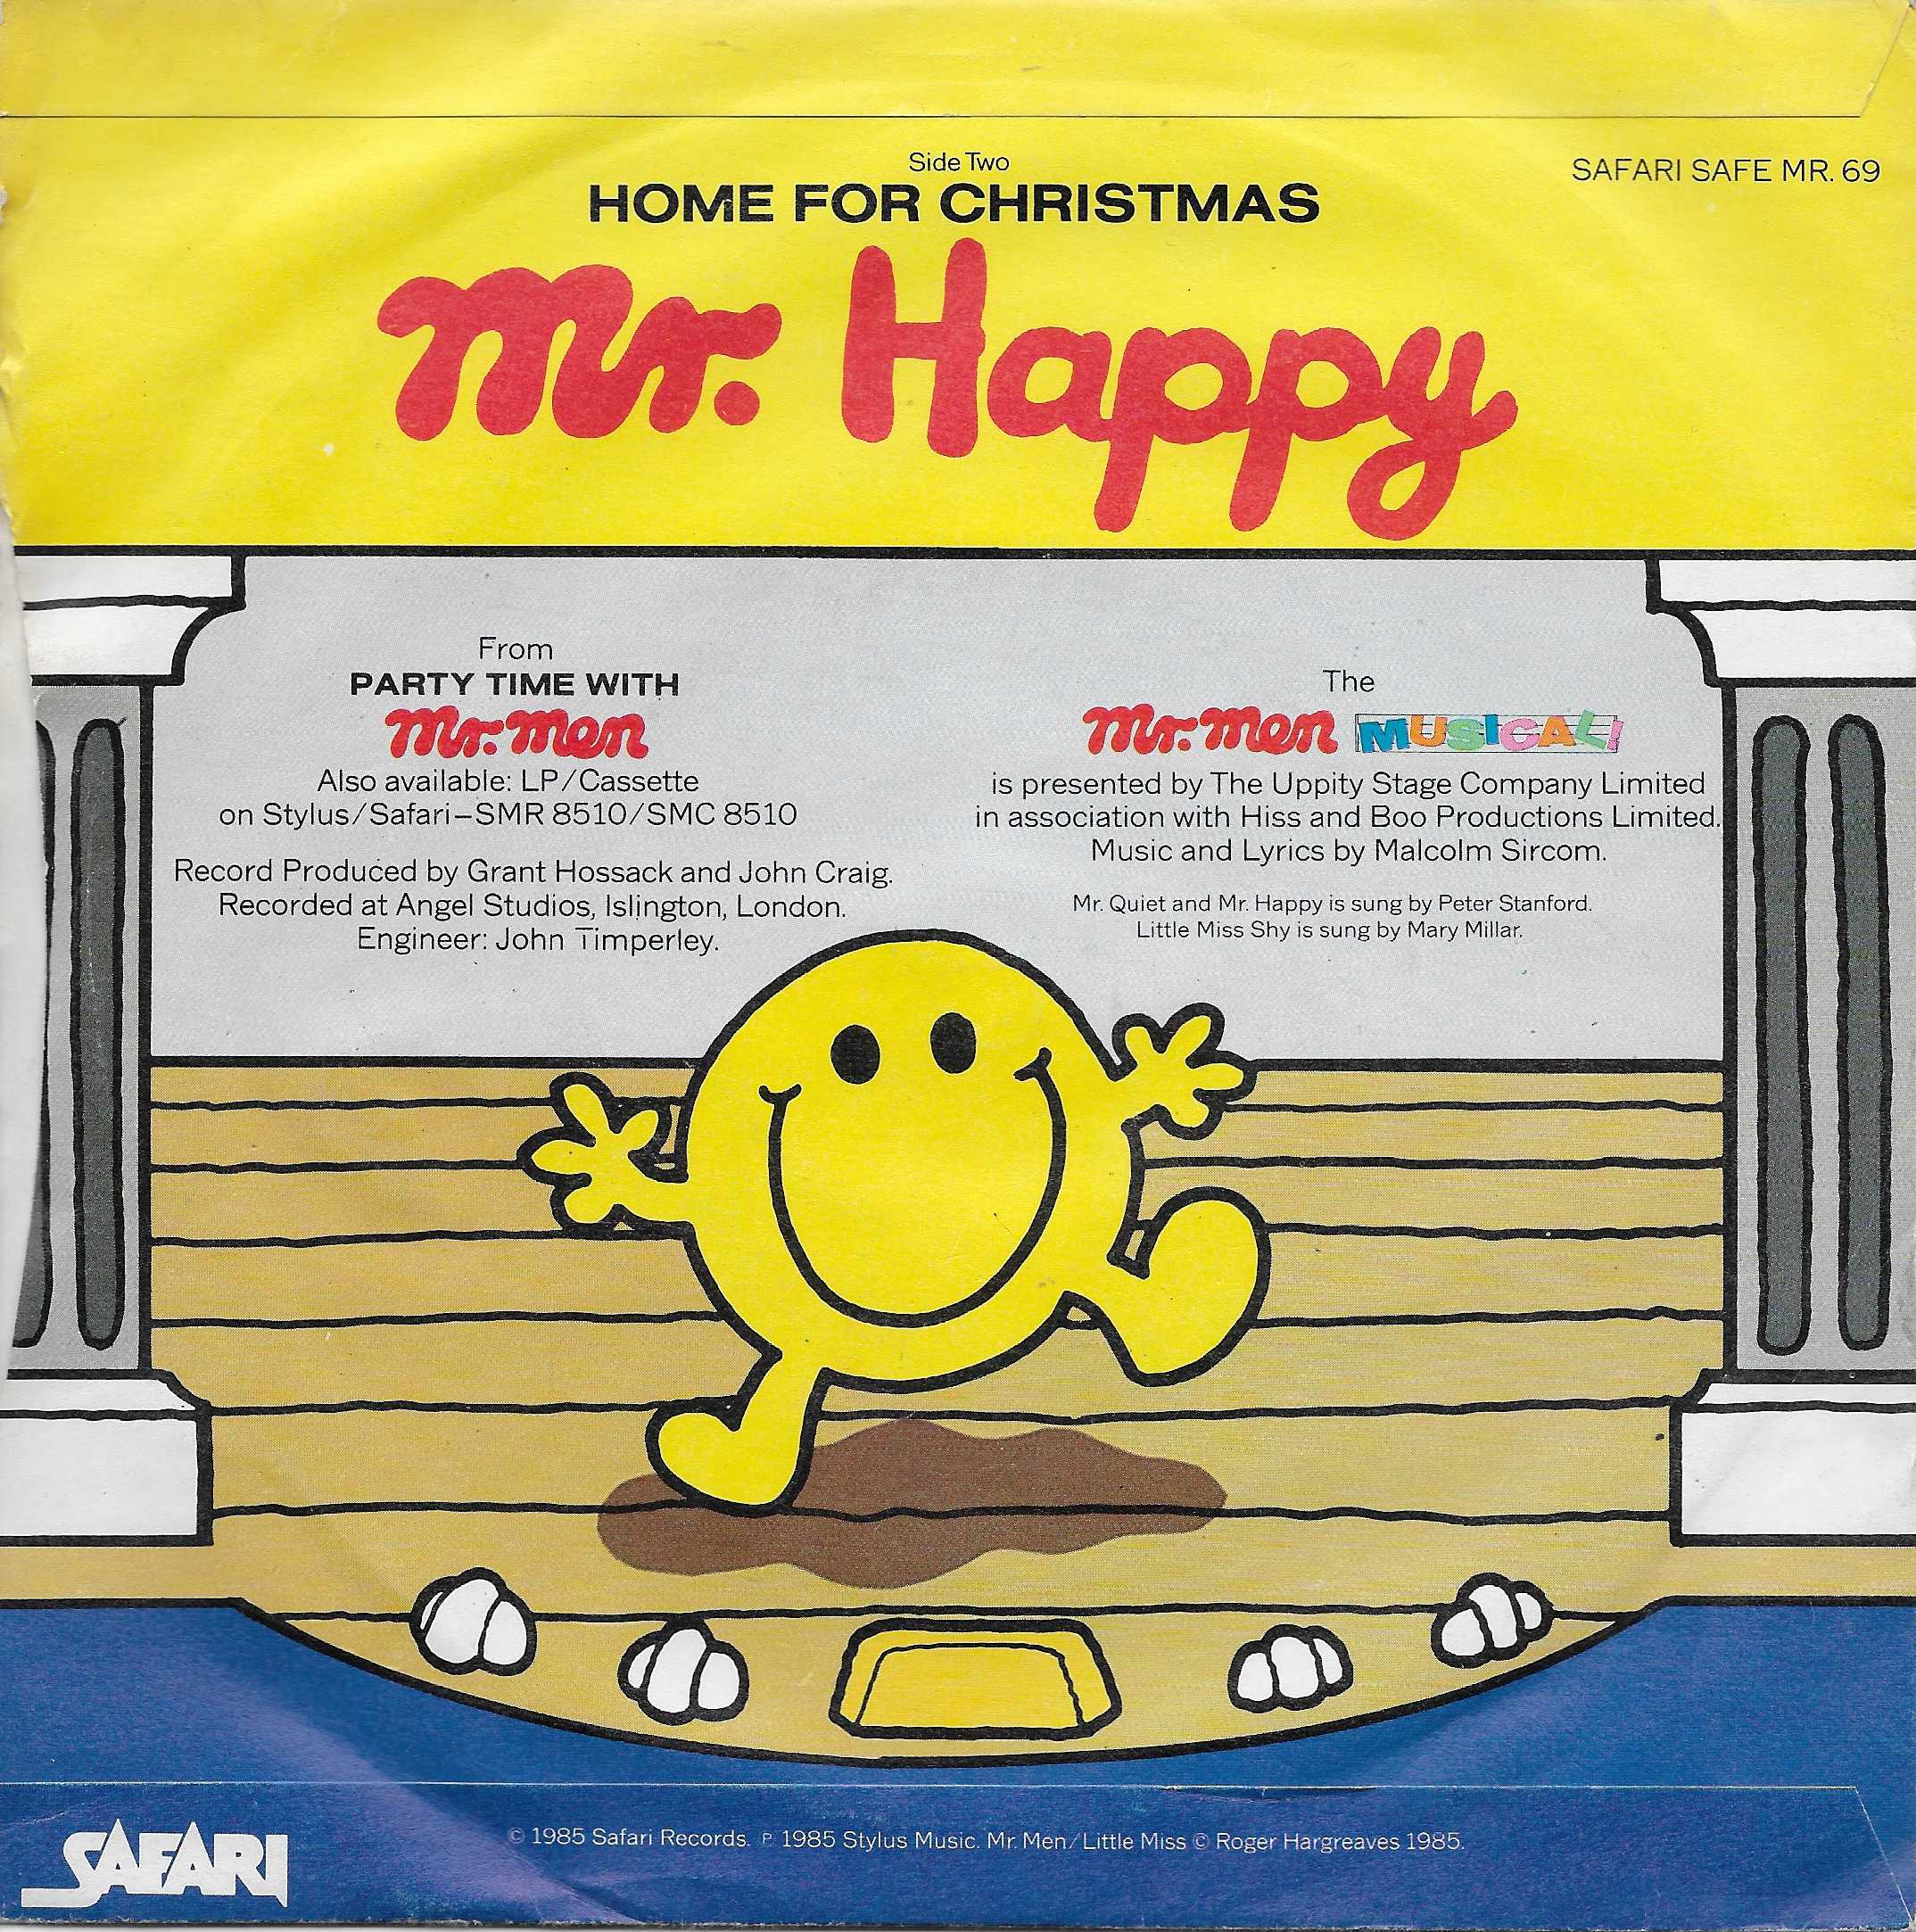 Picture of SAFEMR 69 Mister men - Mr Quiet, Little Miss Shy by artist Roger Hargreaves from the BBC records and Tapes library